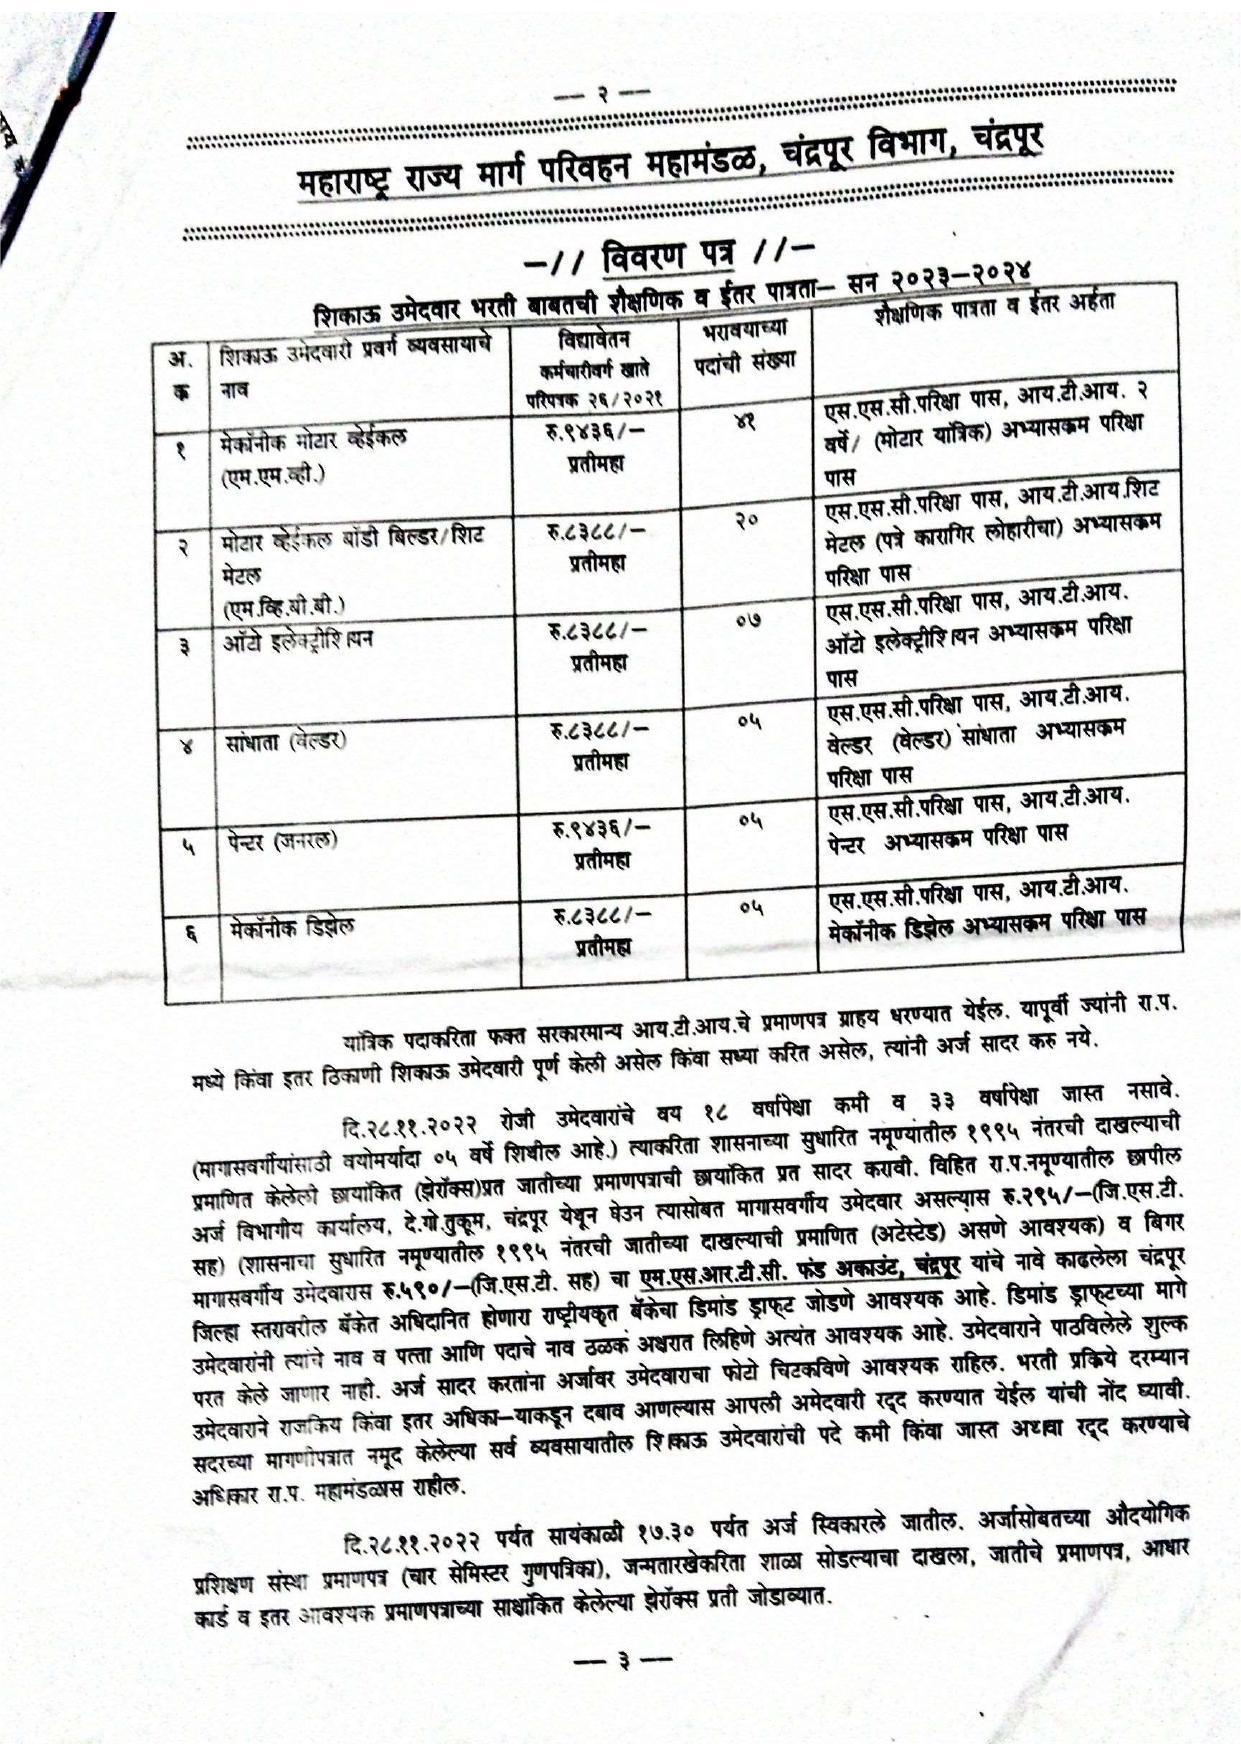 Maharashtra State Road Transport Corporation (MSRTC) Invites Application for 83 Apprentice Recruitment 2022 - Page 1